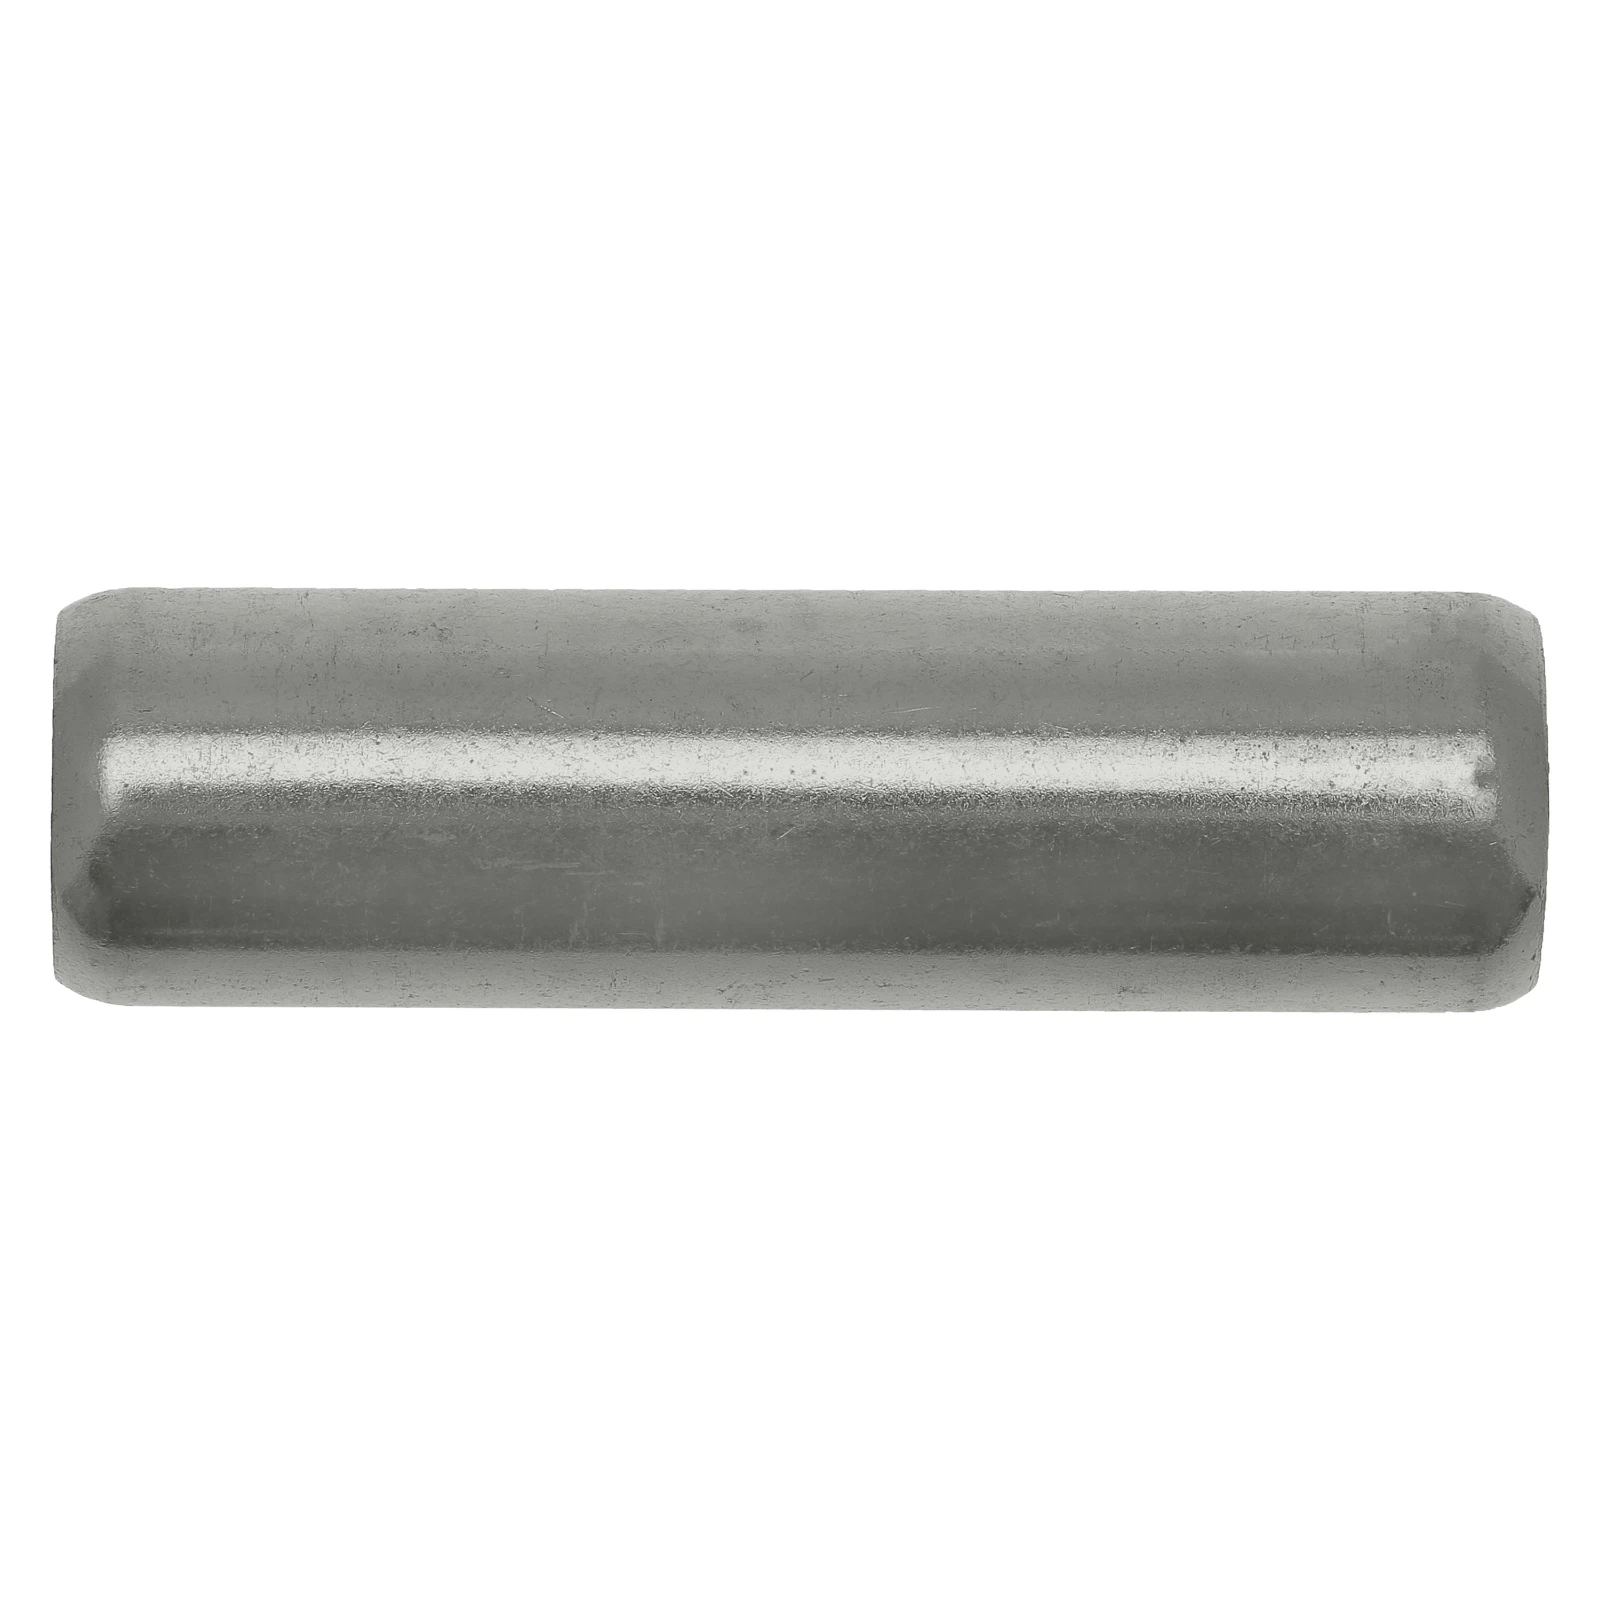 2544475 - Eaton SOLID NEUTRAL LINK